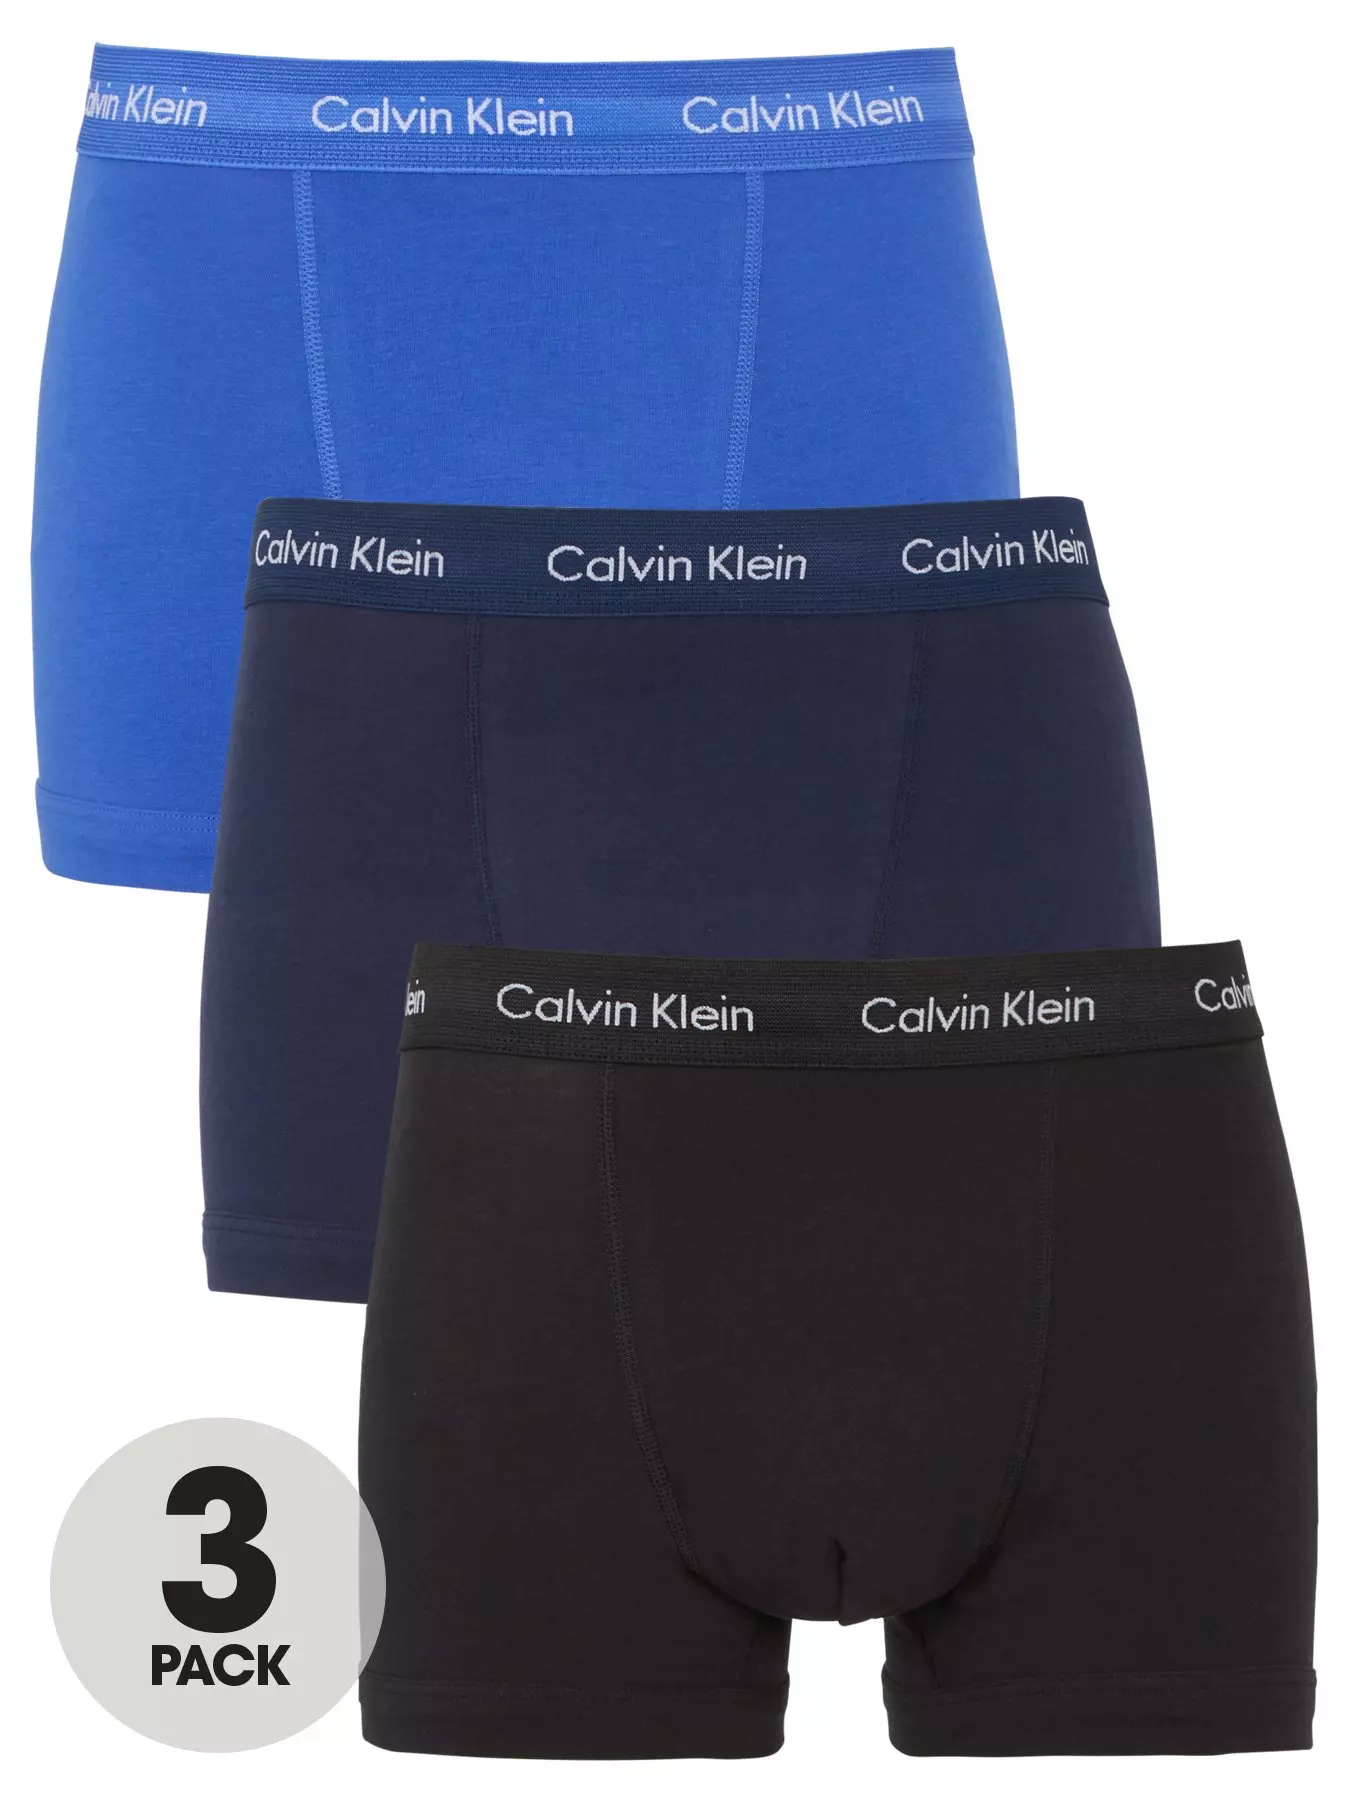 Nike Briefs 3-Pack - Black/Blue/Red/Green